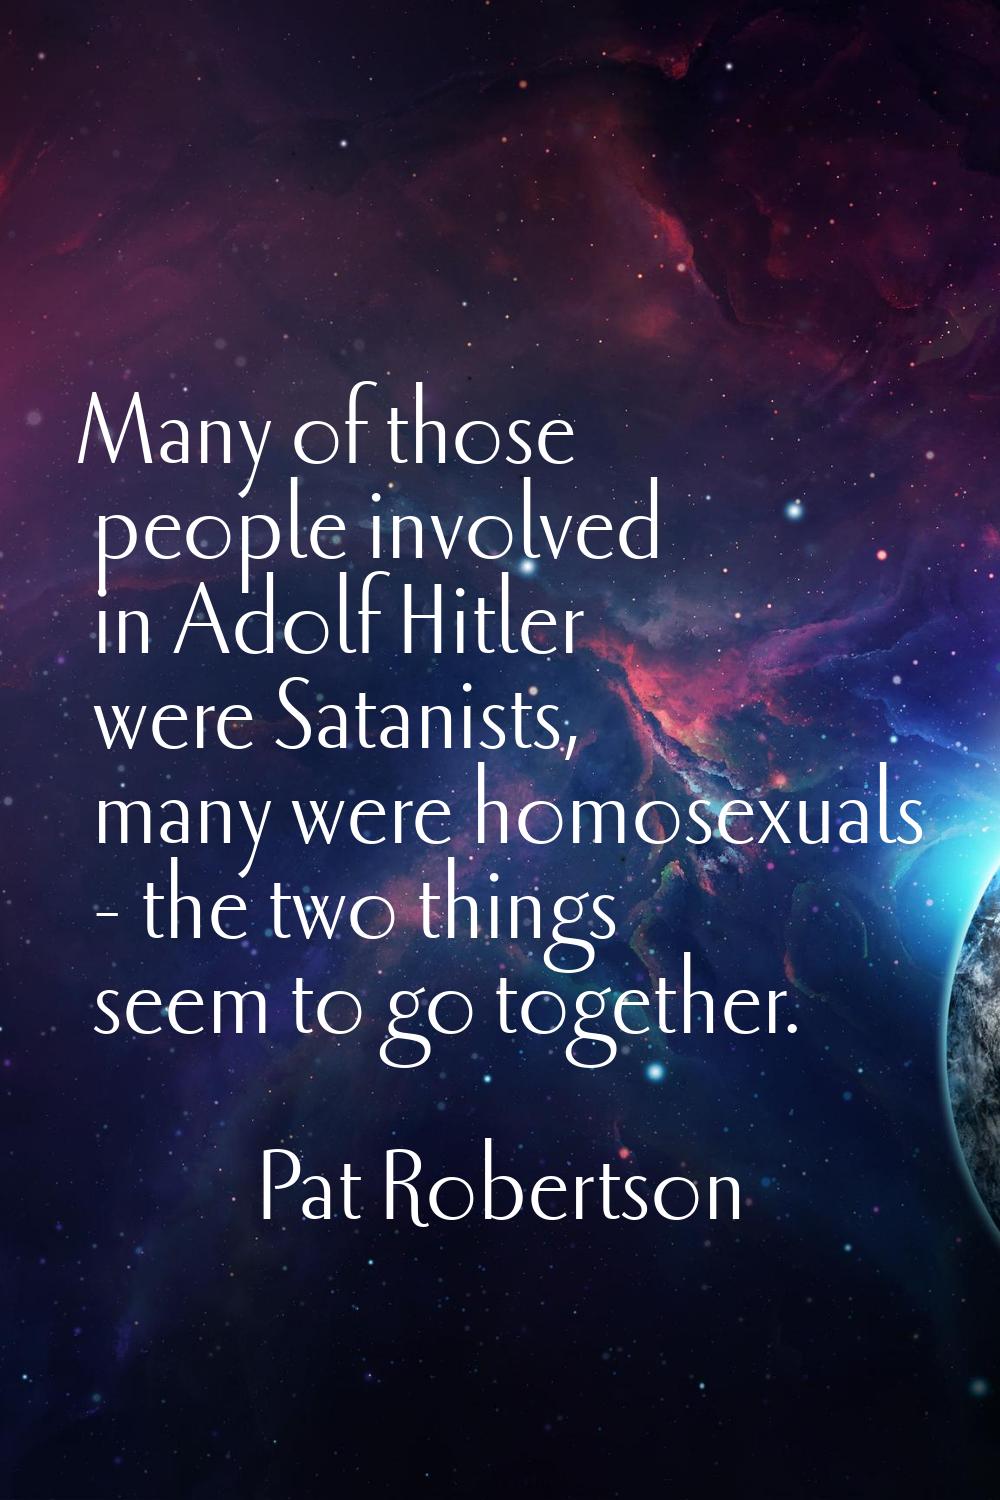 Many of those people involved in Adolf Hitler were Satanists, many were homosexuals - the two thing